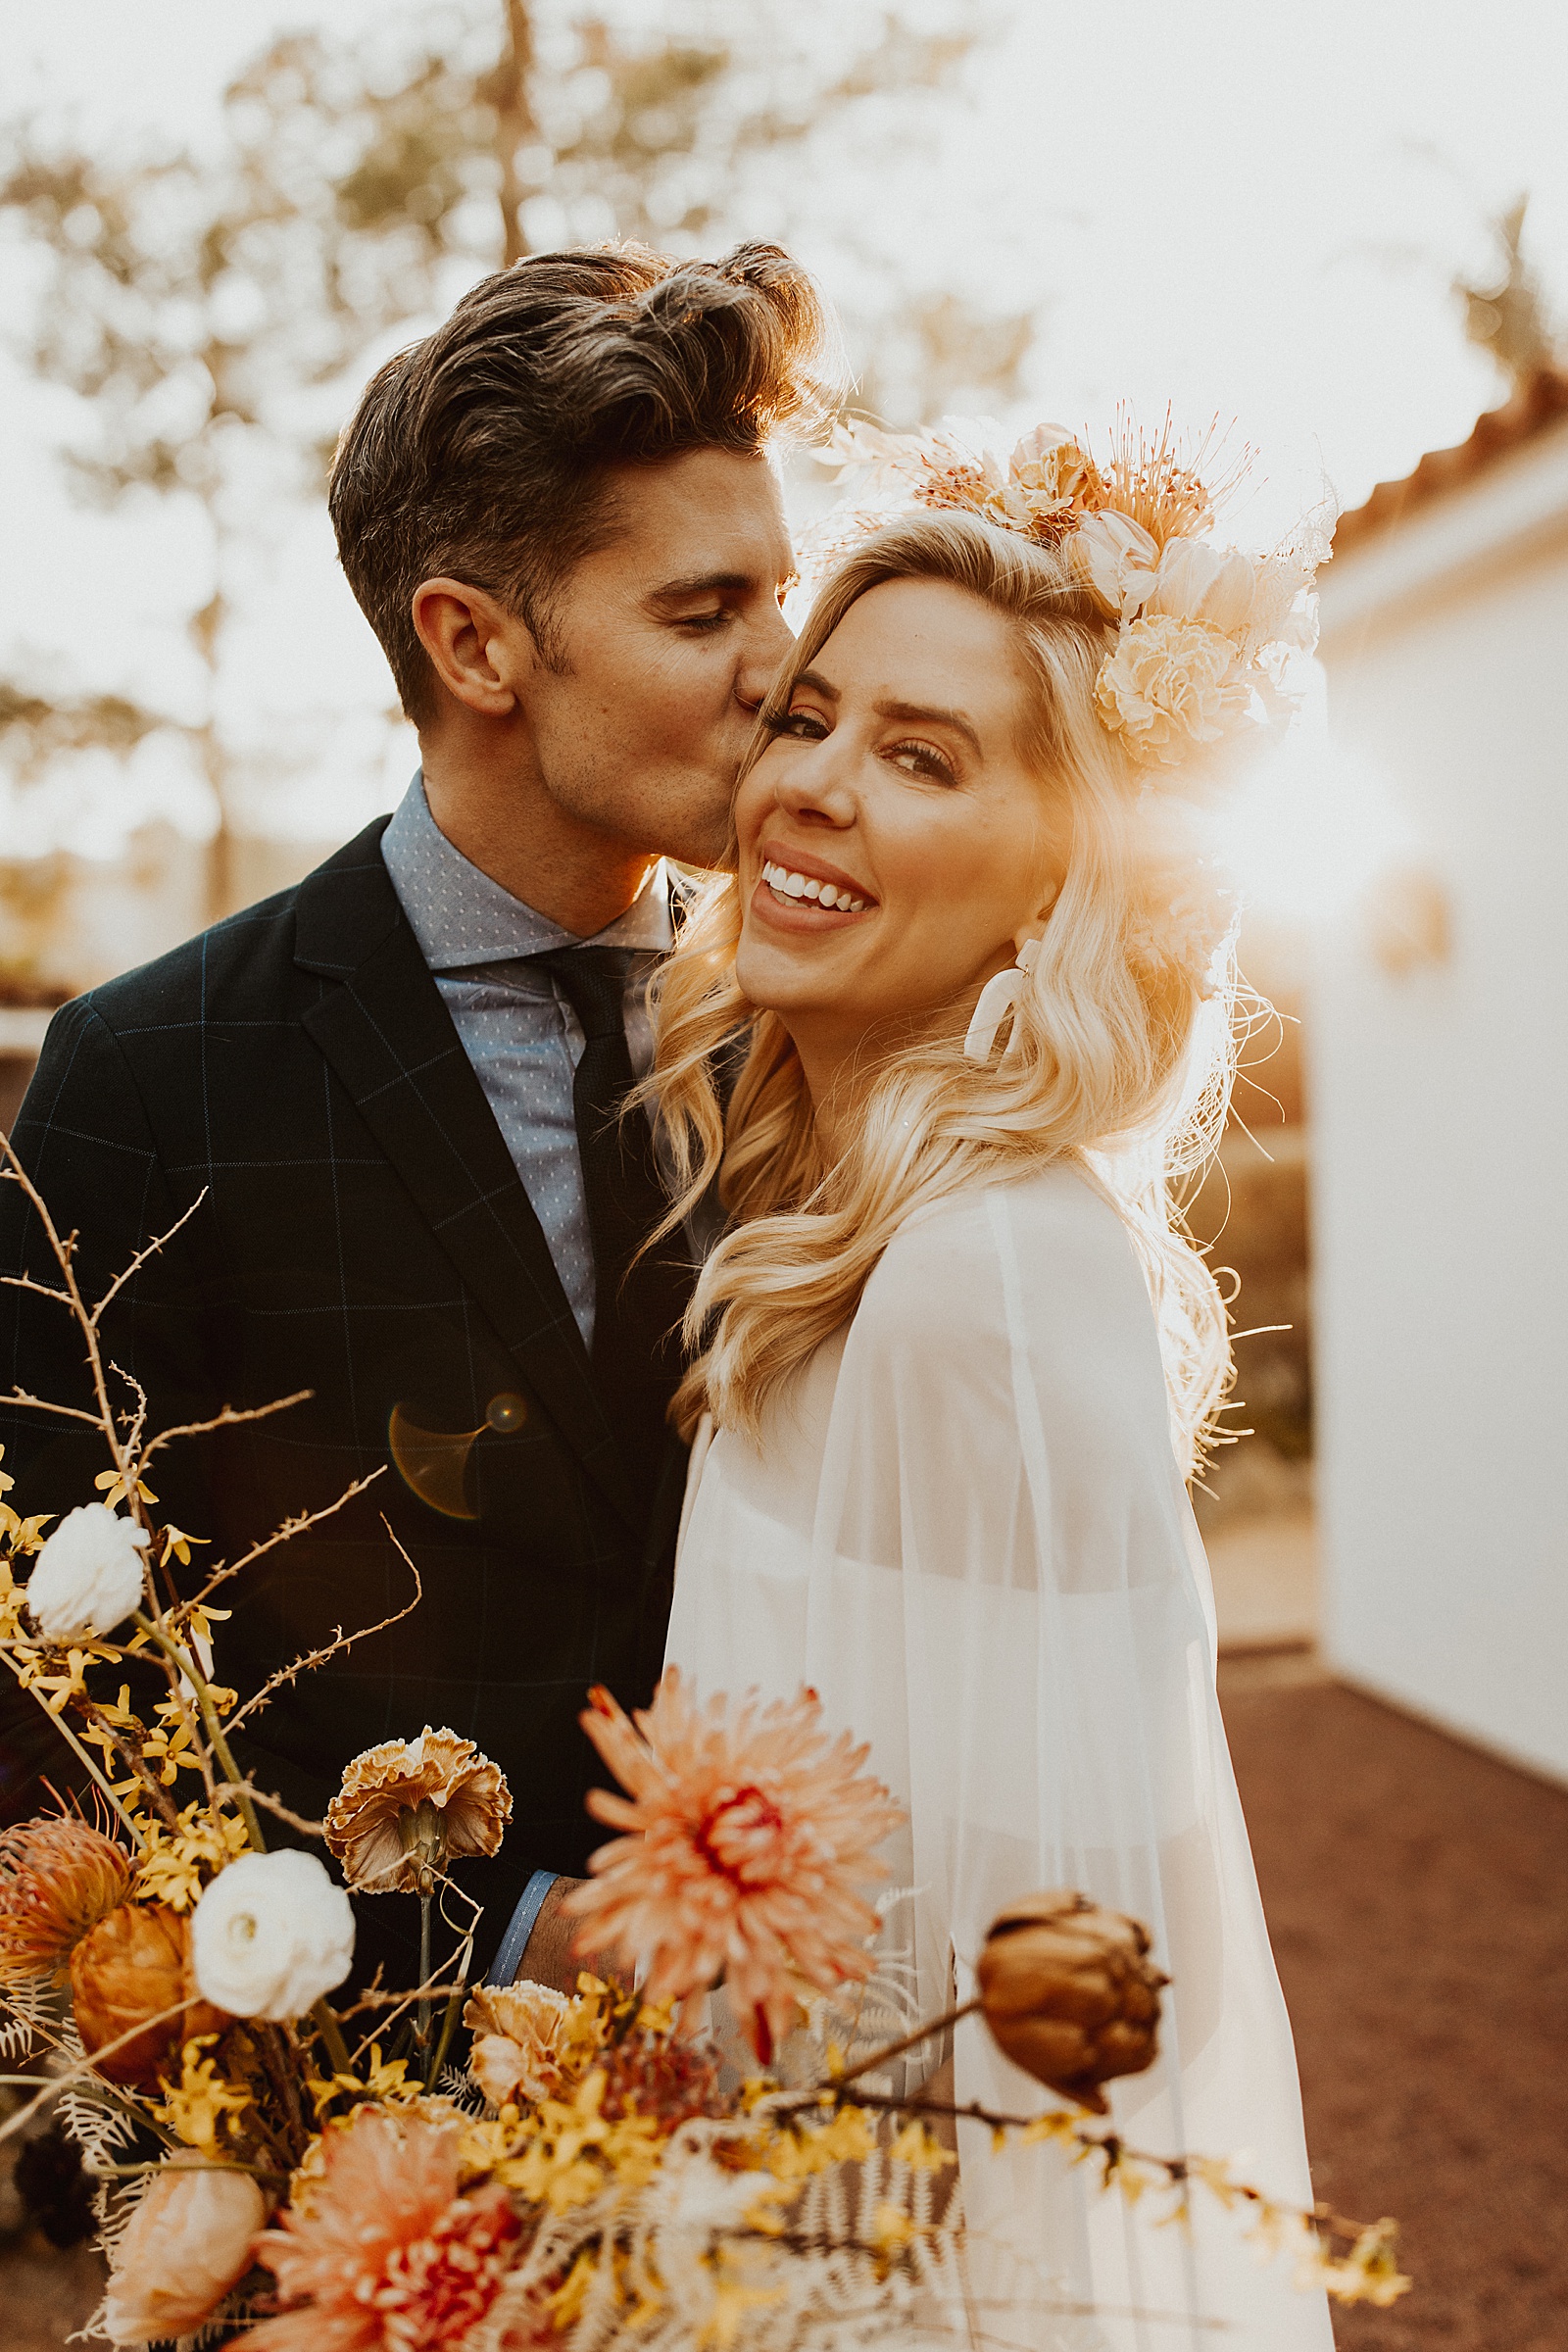 This boho Palm Springs wedding will give you all the bright and joyful vibes!